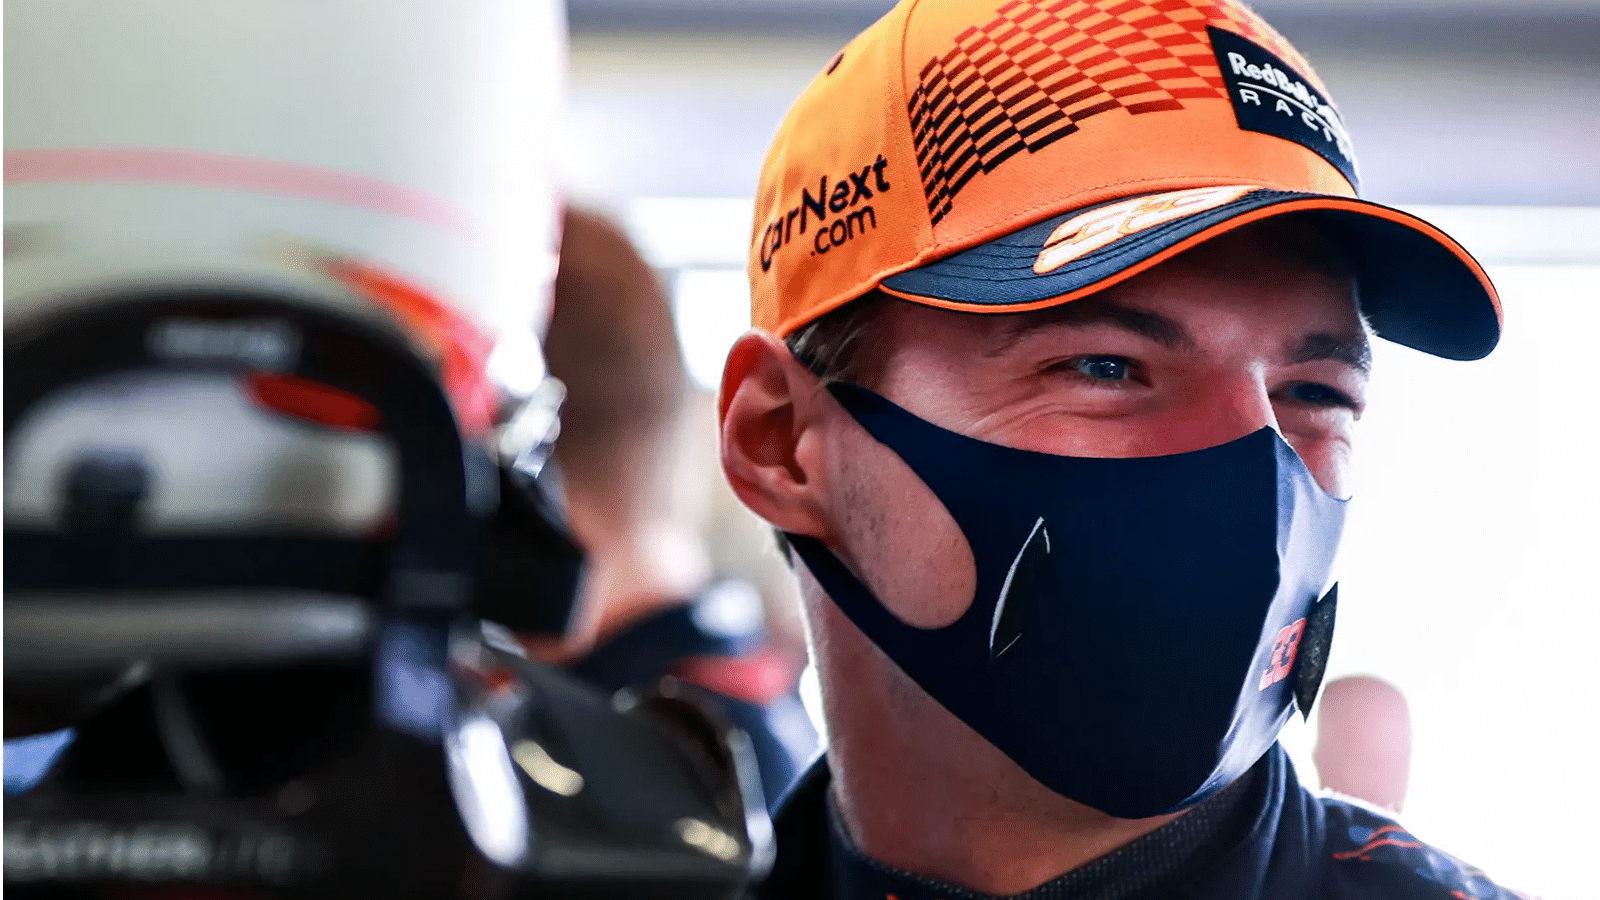 Verstappen says ‘nobody is giving full beans’ after topping final preseason session